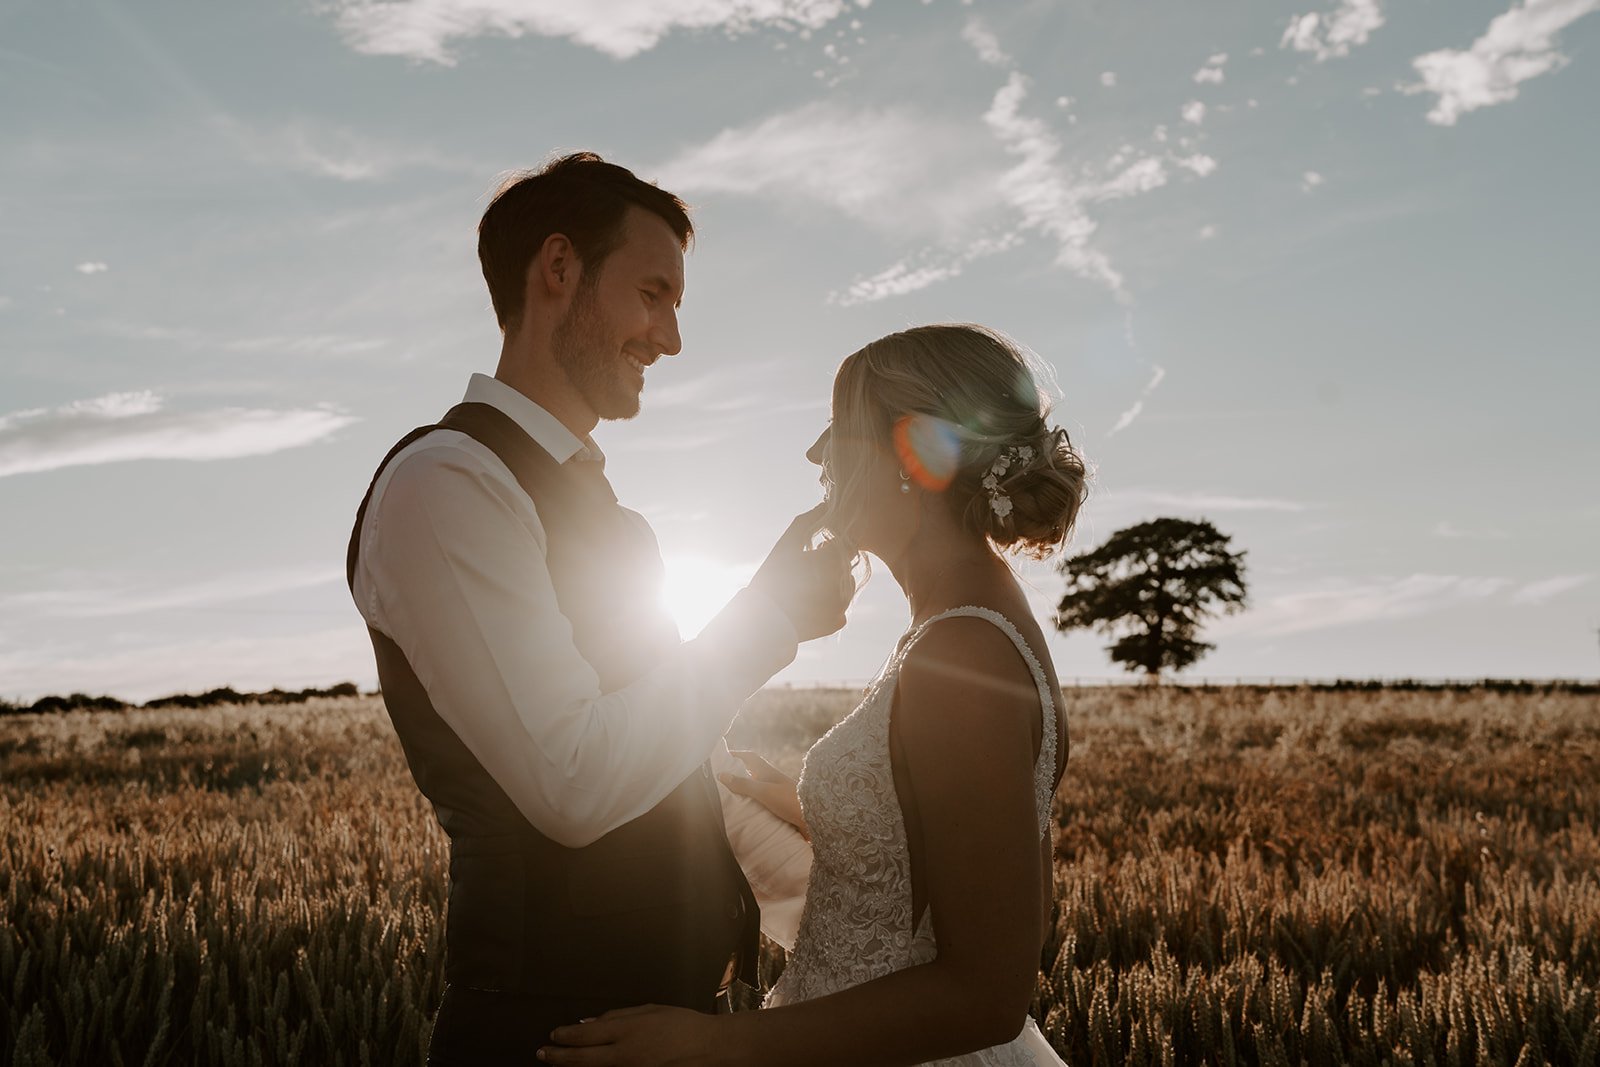 groom tucking brides hair behind ear during golden hour with sun shining and setting behind them